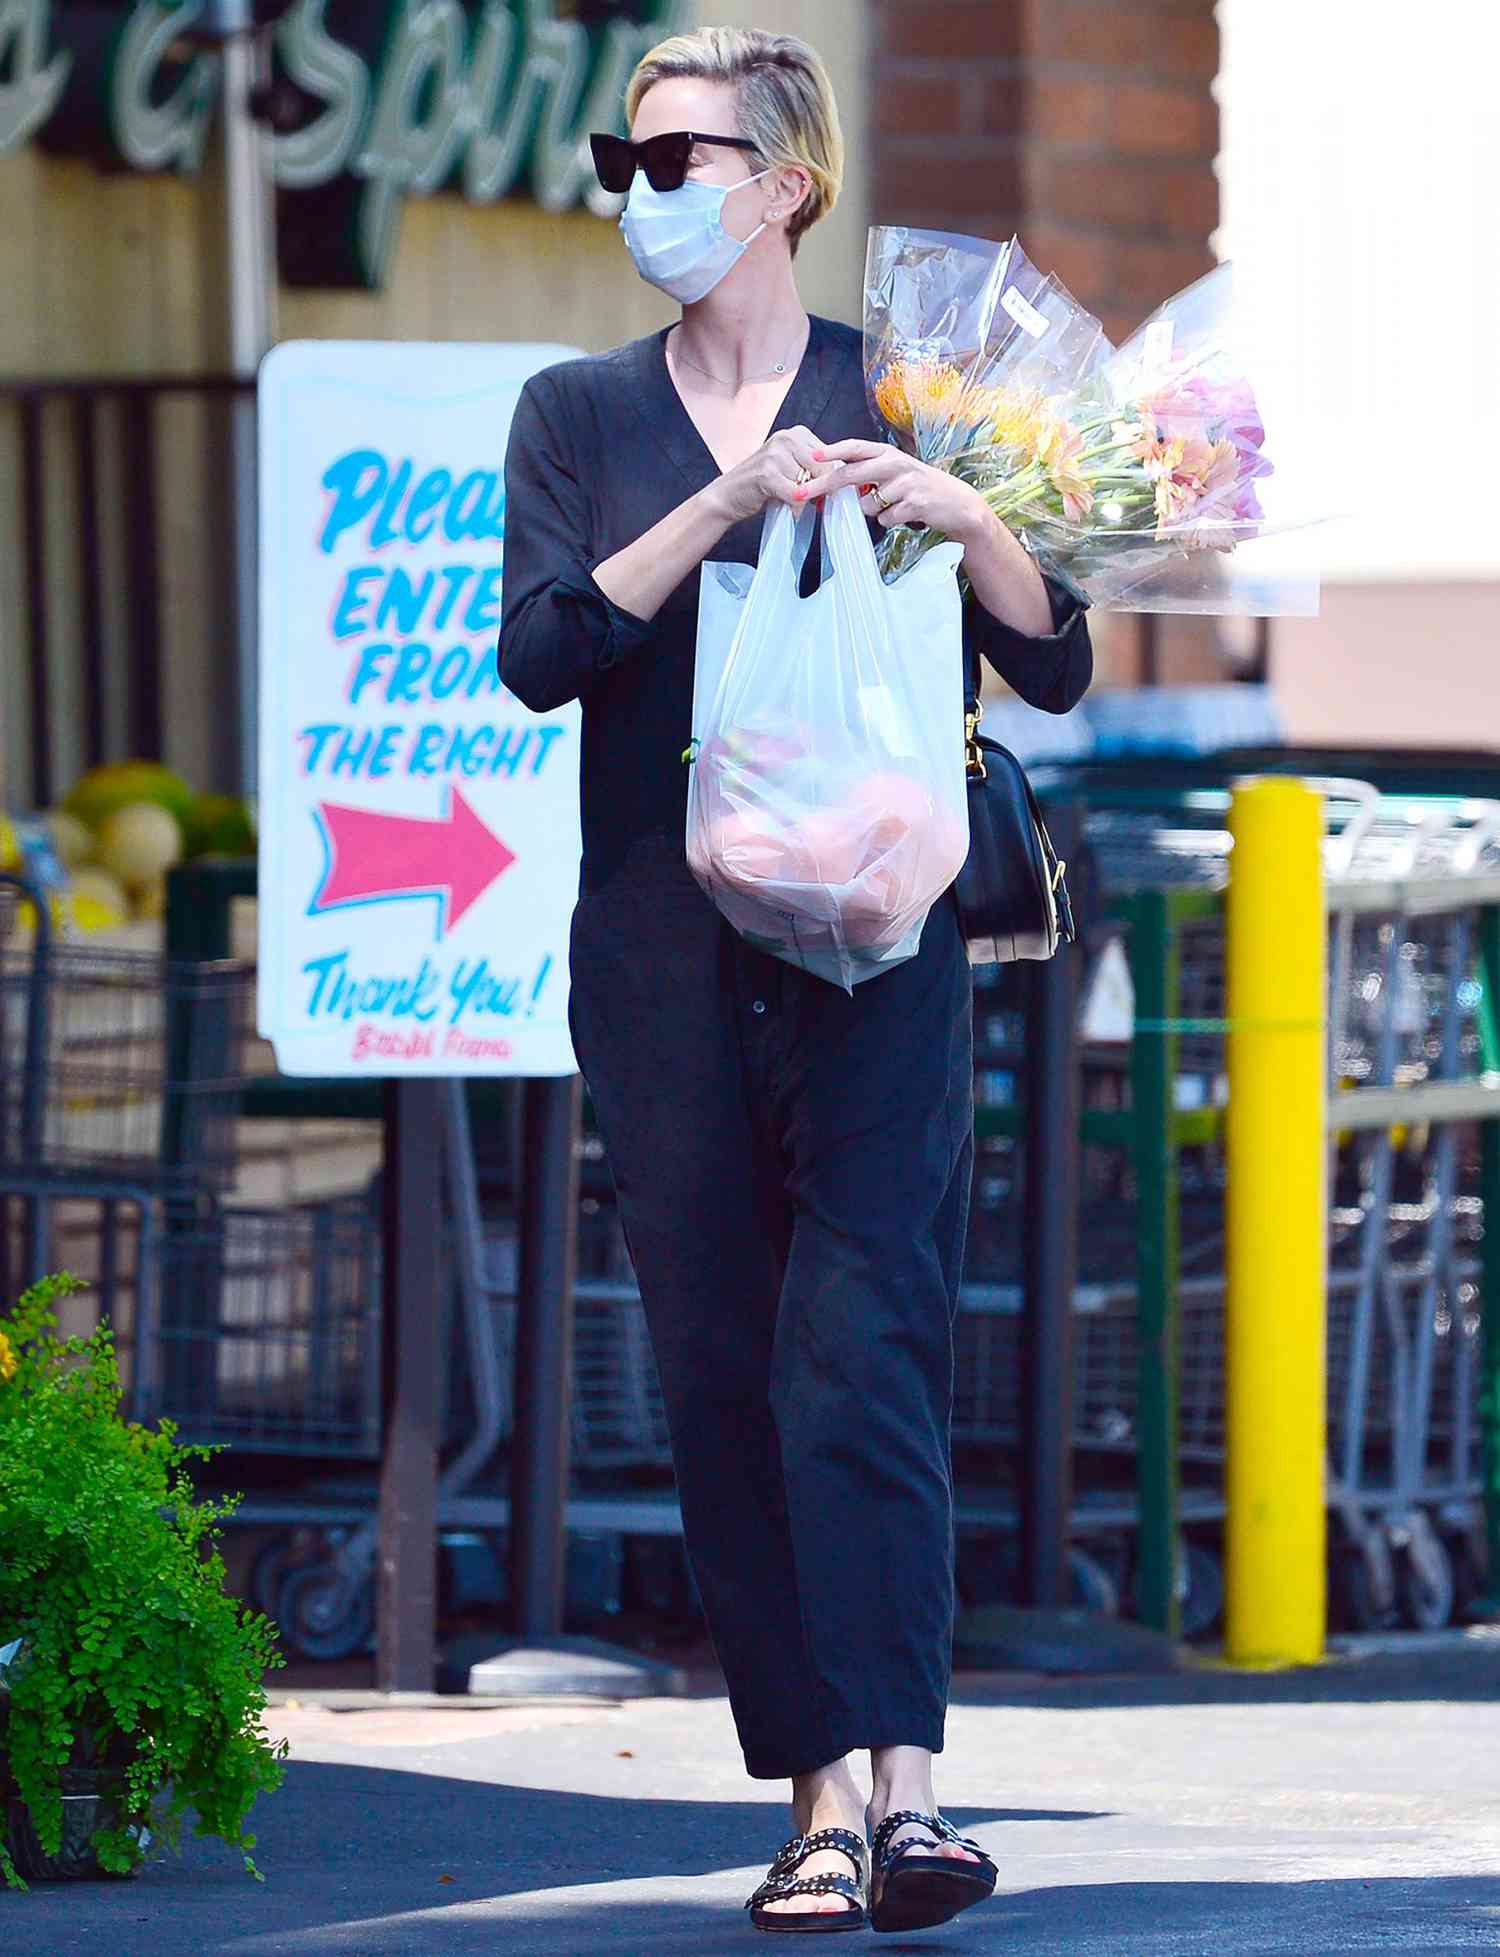 Charlize Theron Heads to a Grocery Store for a Large Variety of Flowers in Los Angeles.